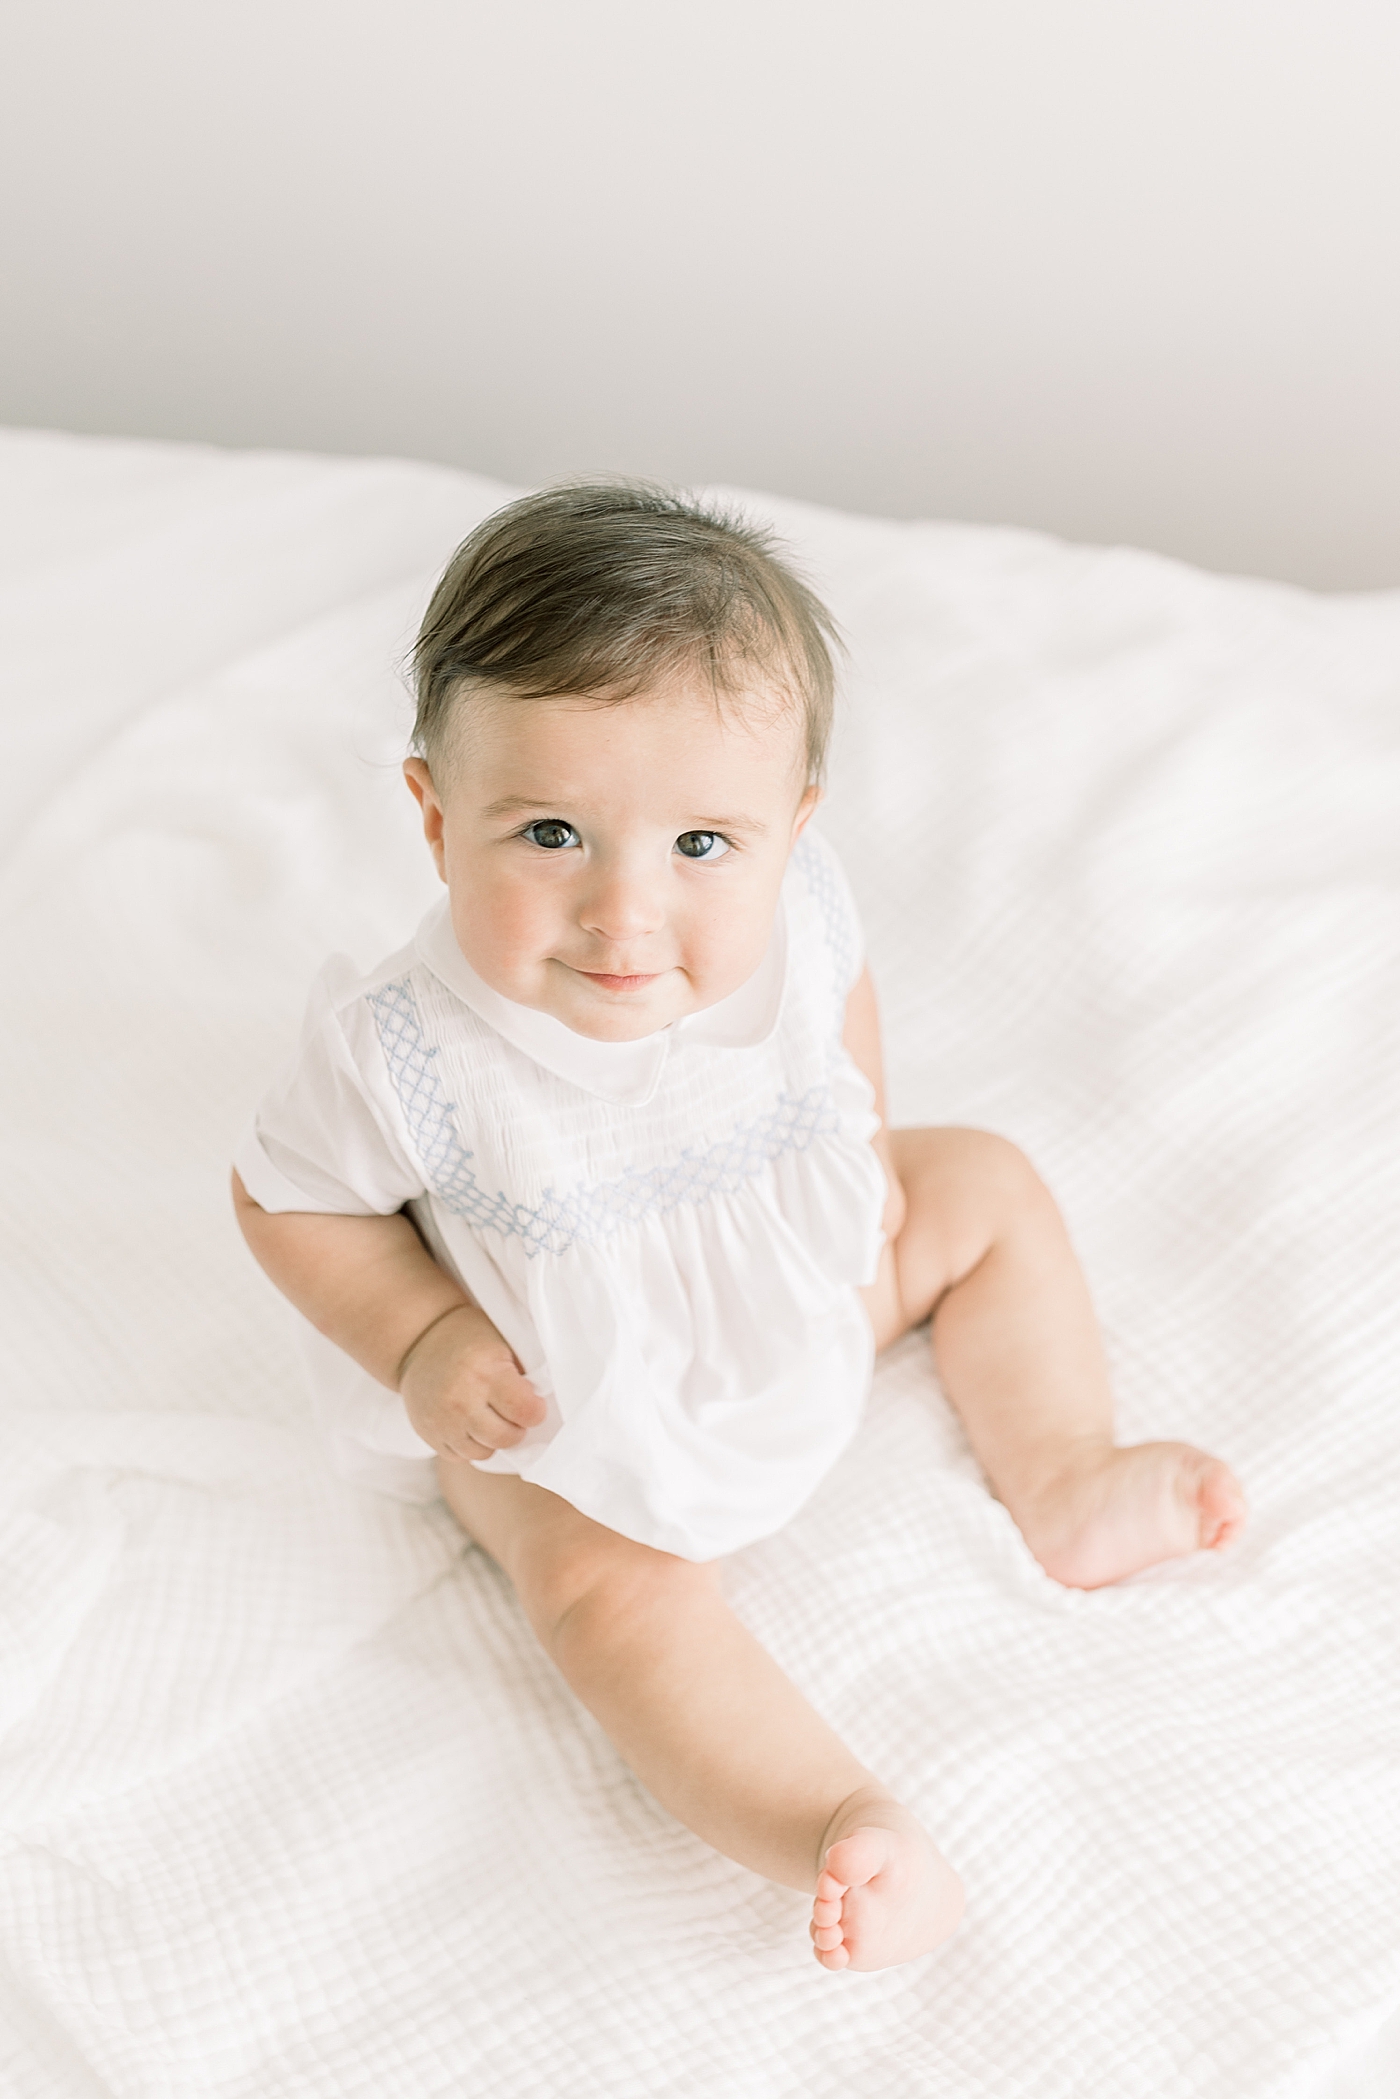 Baby smiling and looking up at camera during Studio Milestone Session | Images by Caitlyn Motycka